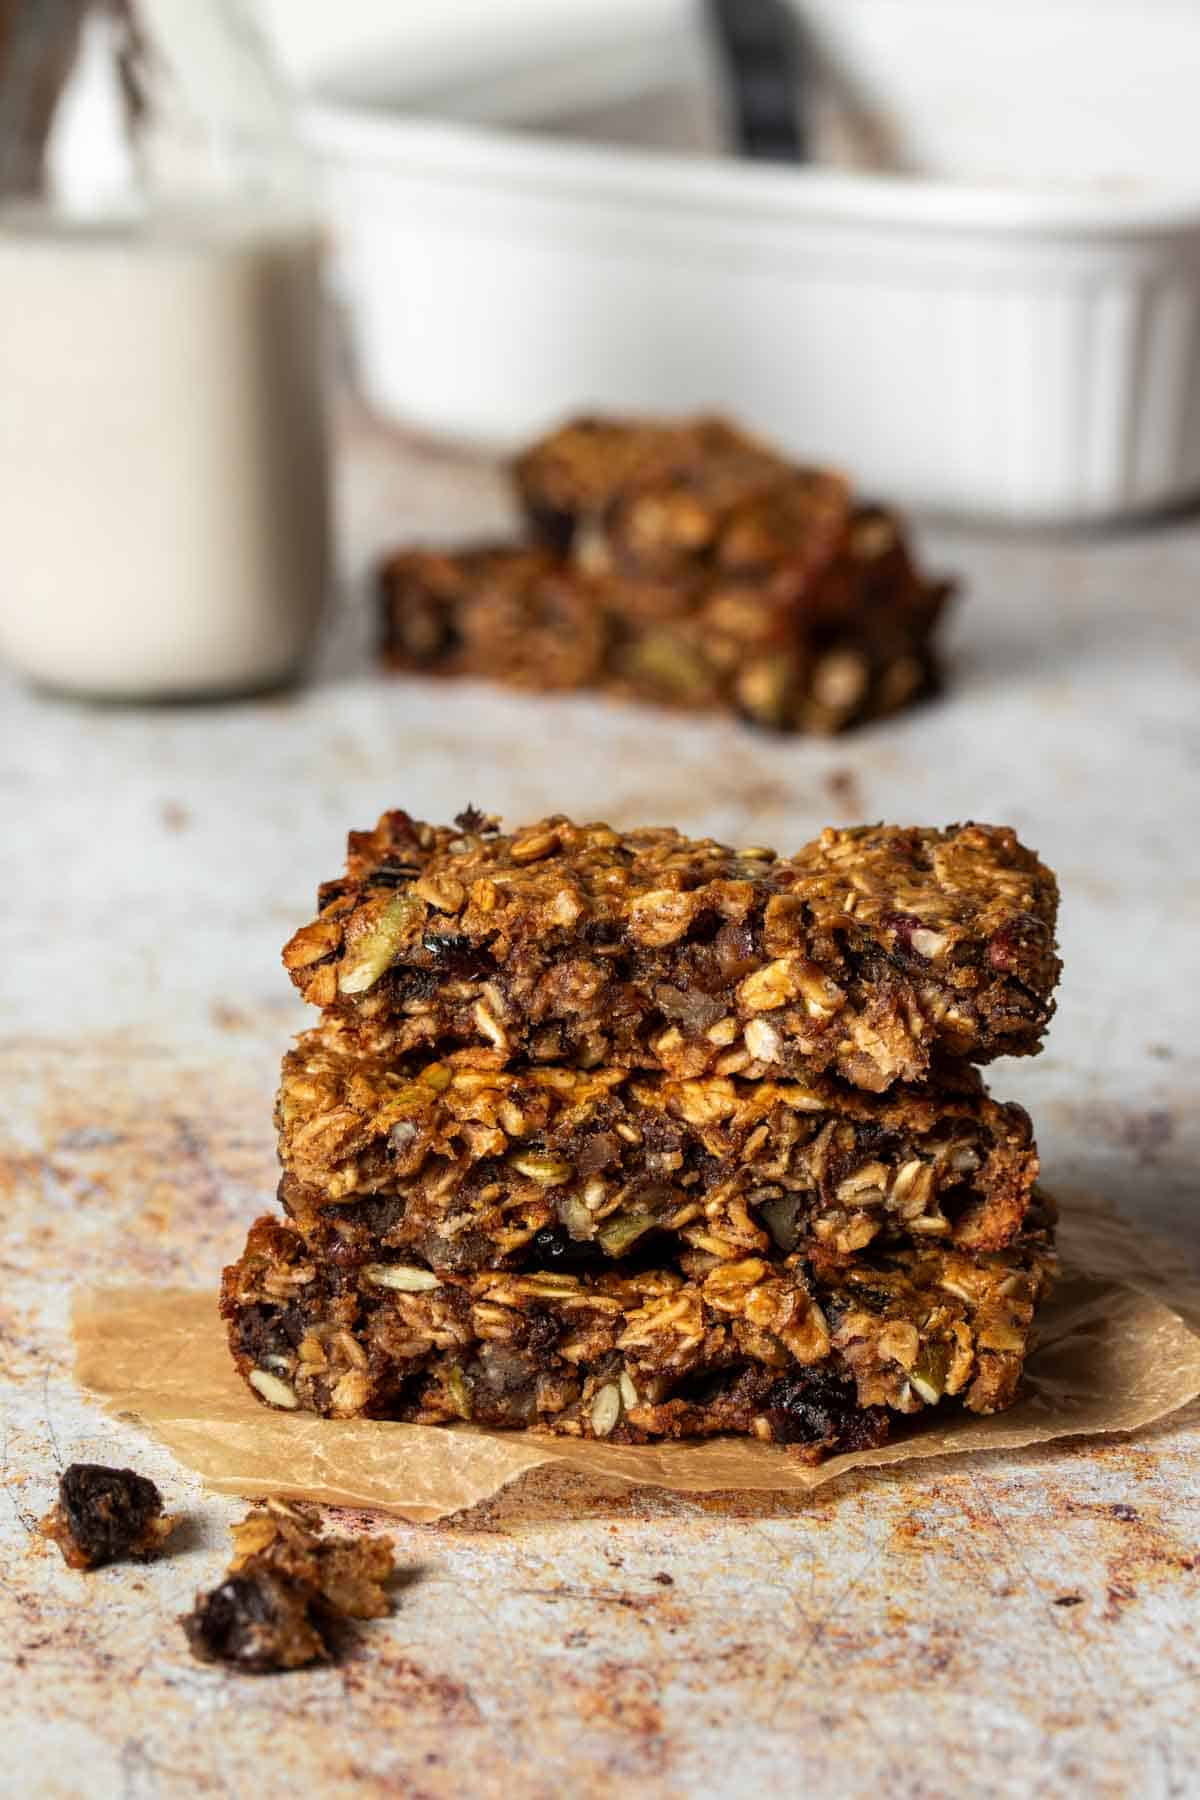 A stack of breakfast bars with oats, nuts and dried fruit sitting in front of more bars, a white pan and a jar of milk.